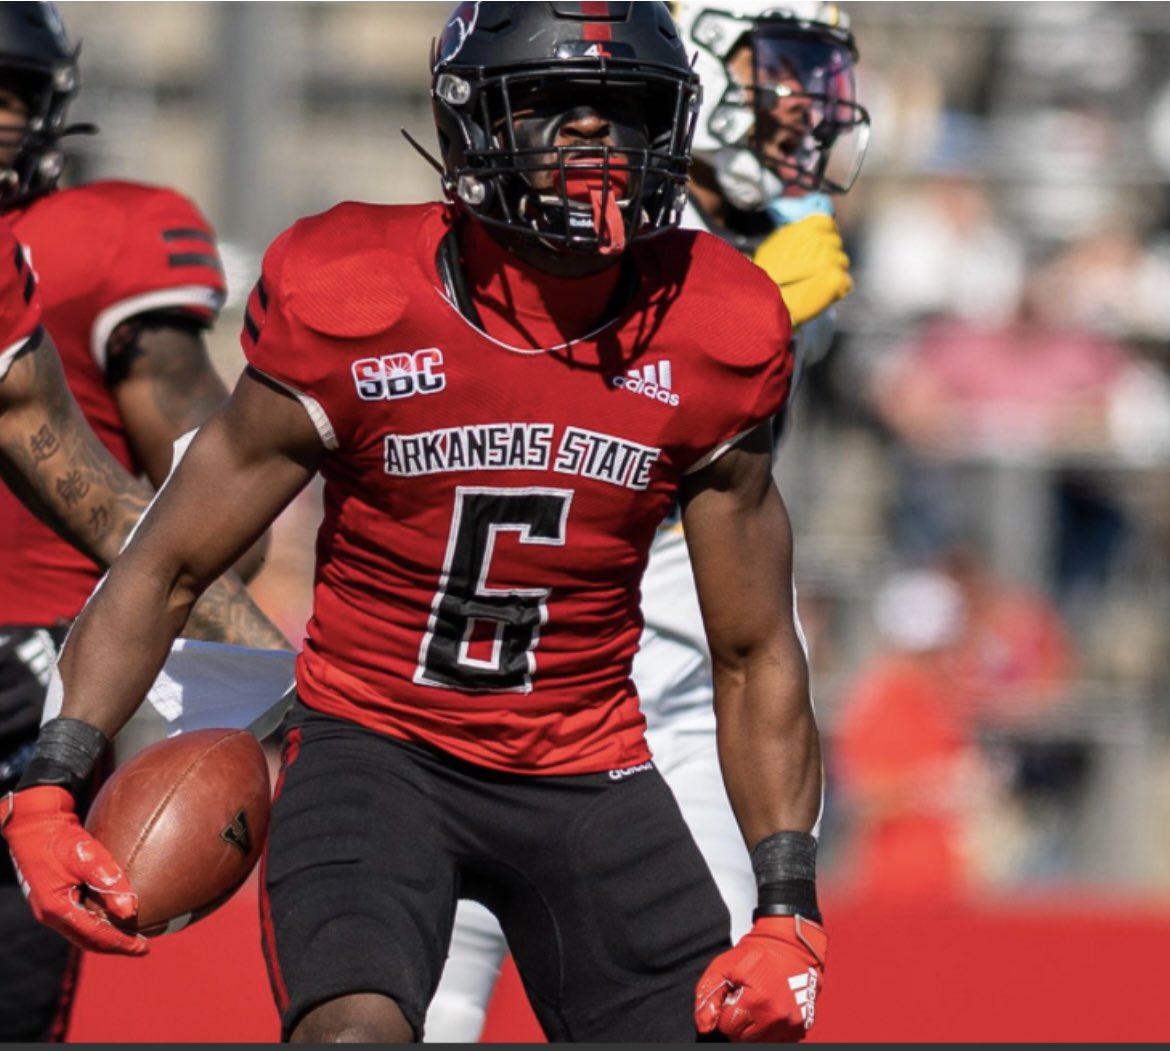 Blessed To Receive An Offer From @AStateFB @CoachAKwon @ScoutFball @GrindLab @JemisonJags @HallTechSports1 @DexPreps @TomLoy247 @SeanW_Rivals @DownSouthFb1 @Andrew_Ivins @ChadSimmons_ @BHoward_11 @JohnGarcia_Jr @AL_Recruiting @RocketCityPreps